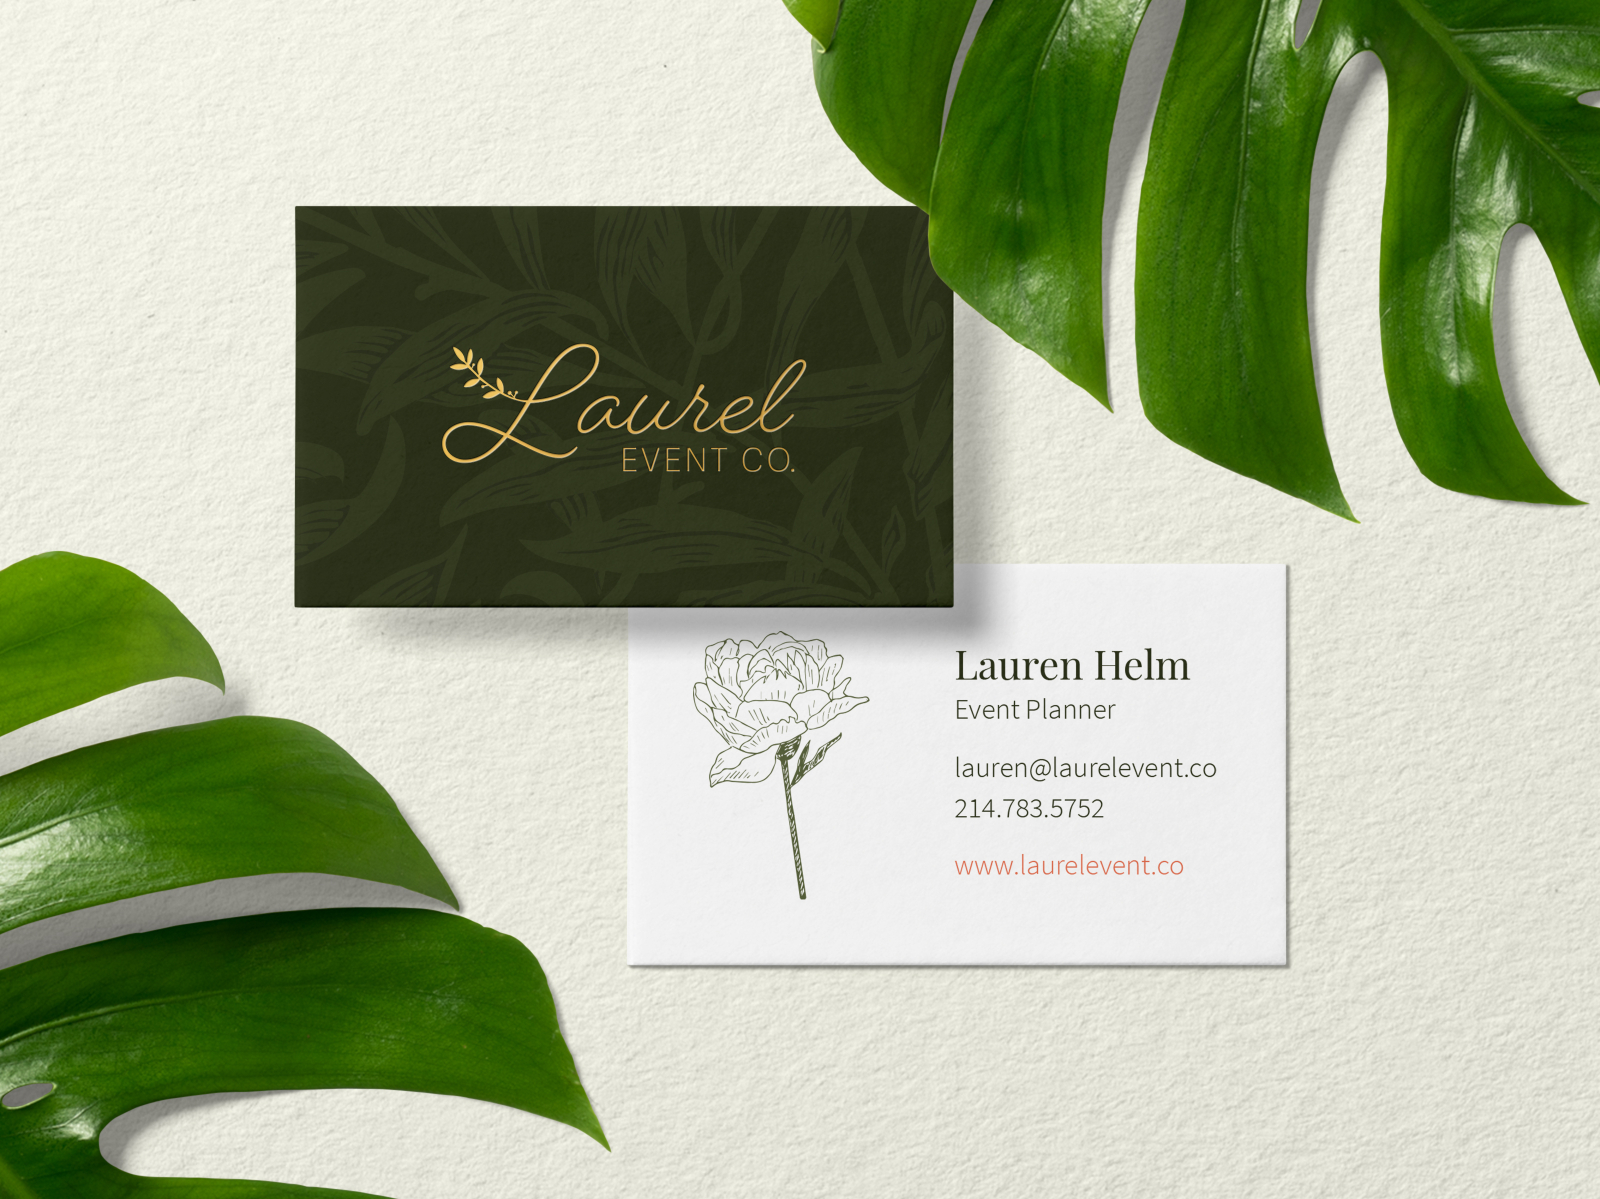 Laurel Event Co. Business Cards by Adam Helm ⎈ on Dribbble